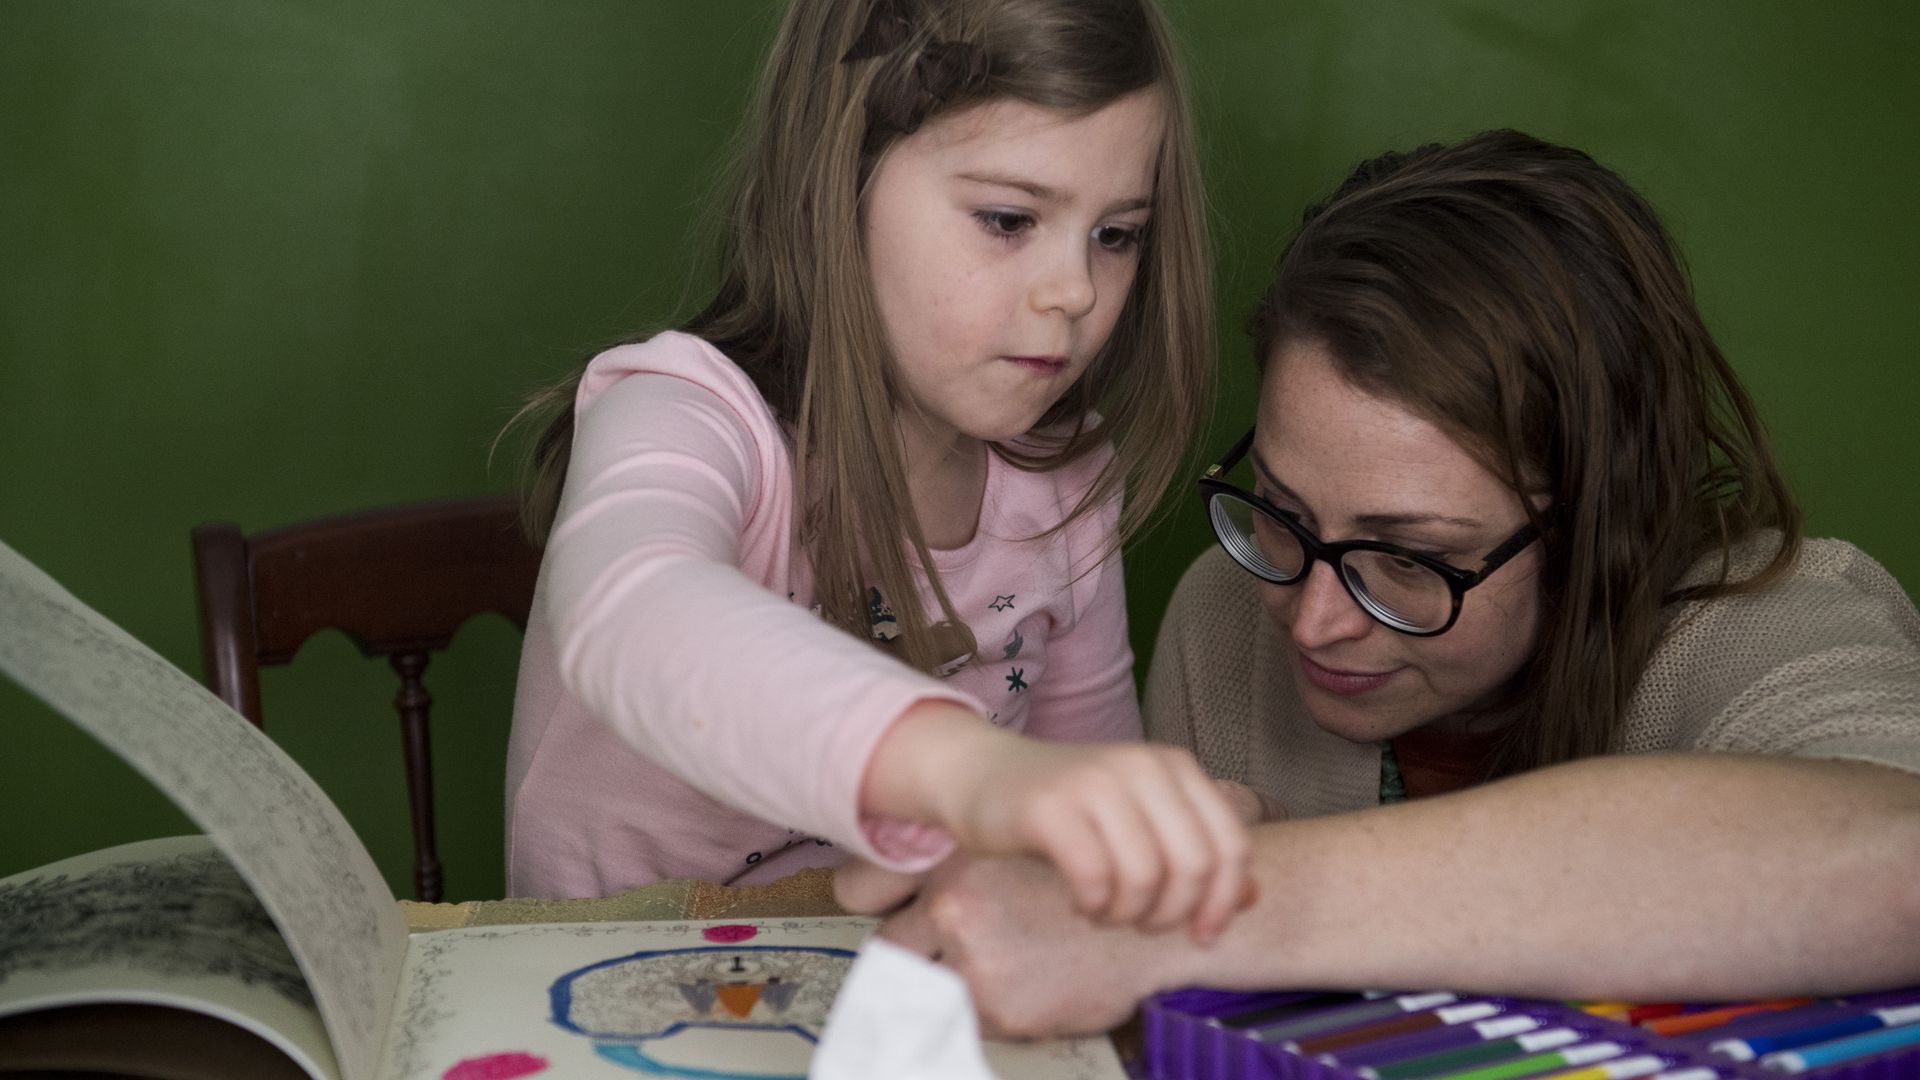 A mother on Medicaid in Kentucky plays with her daughter